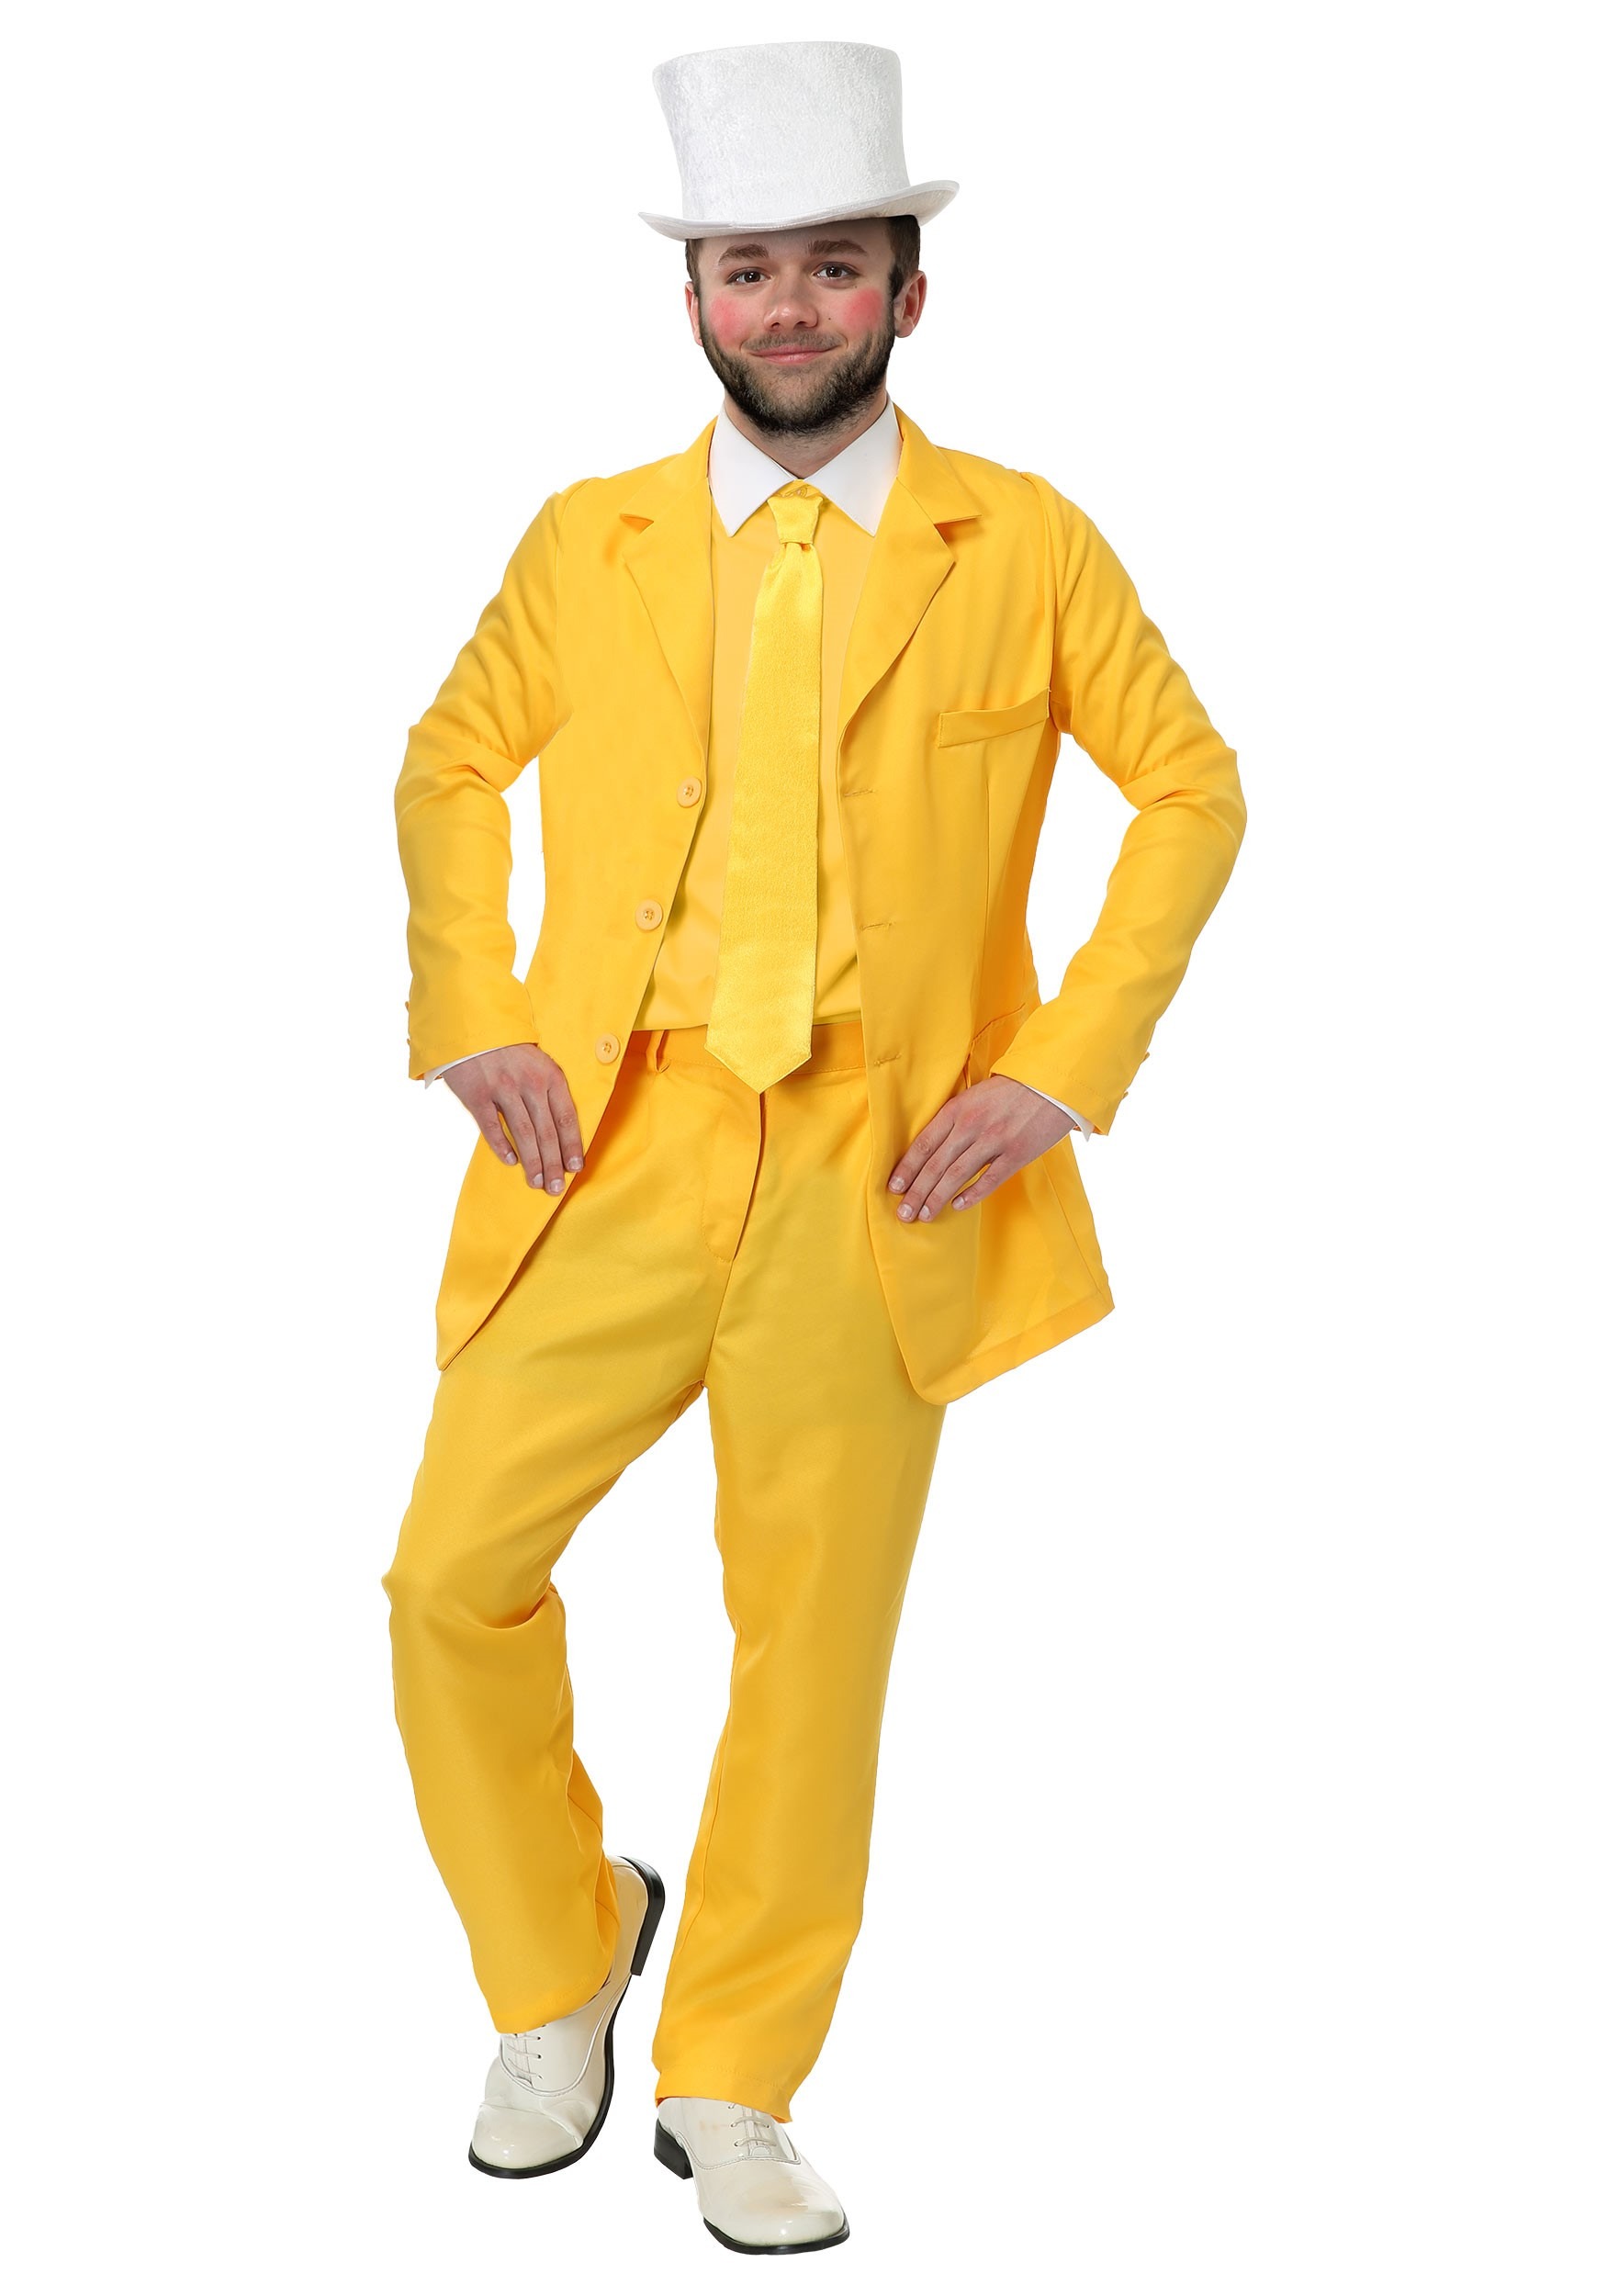 Always Sunny Dayman Yellow Suit Costume